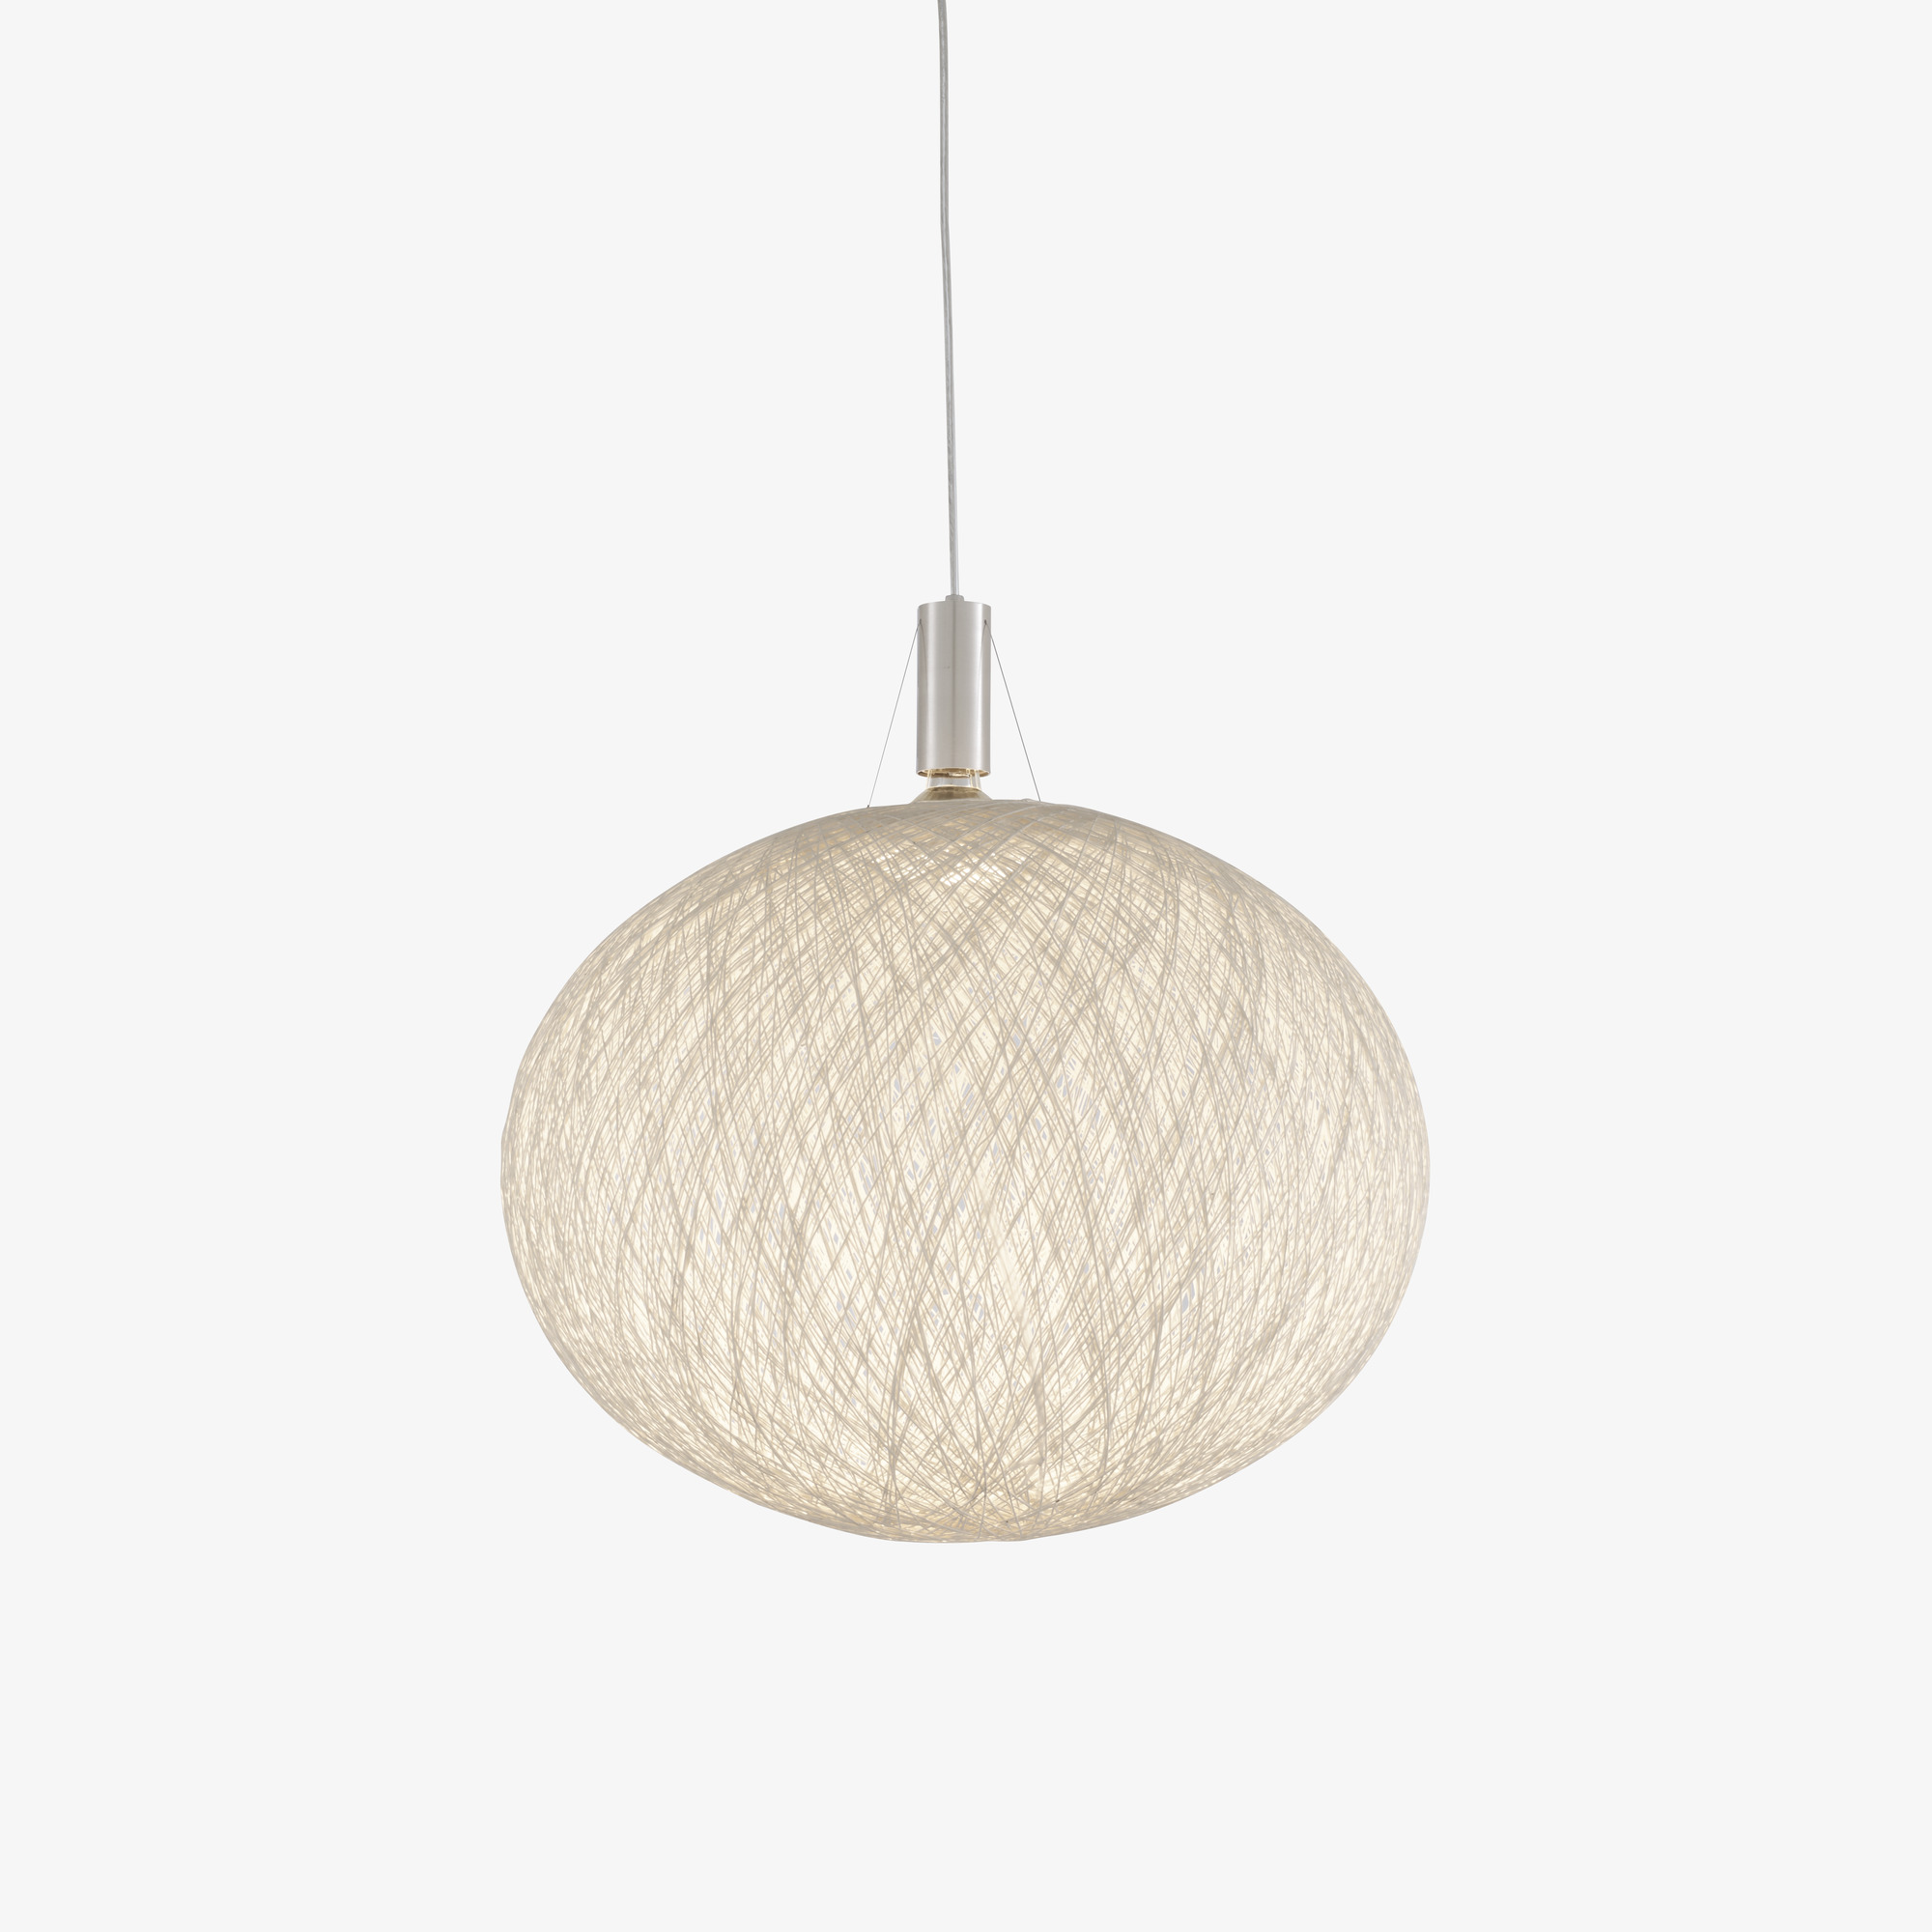 Image Suspended ceiling light 1